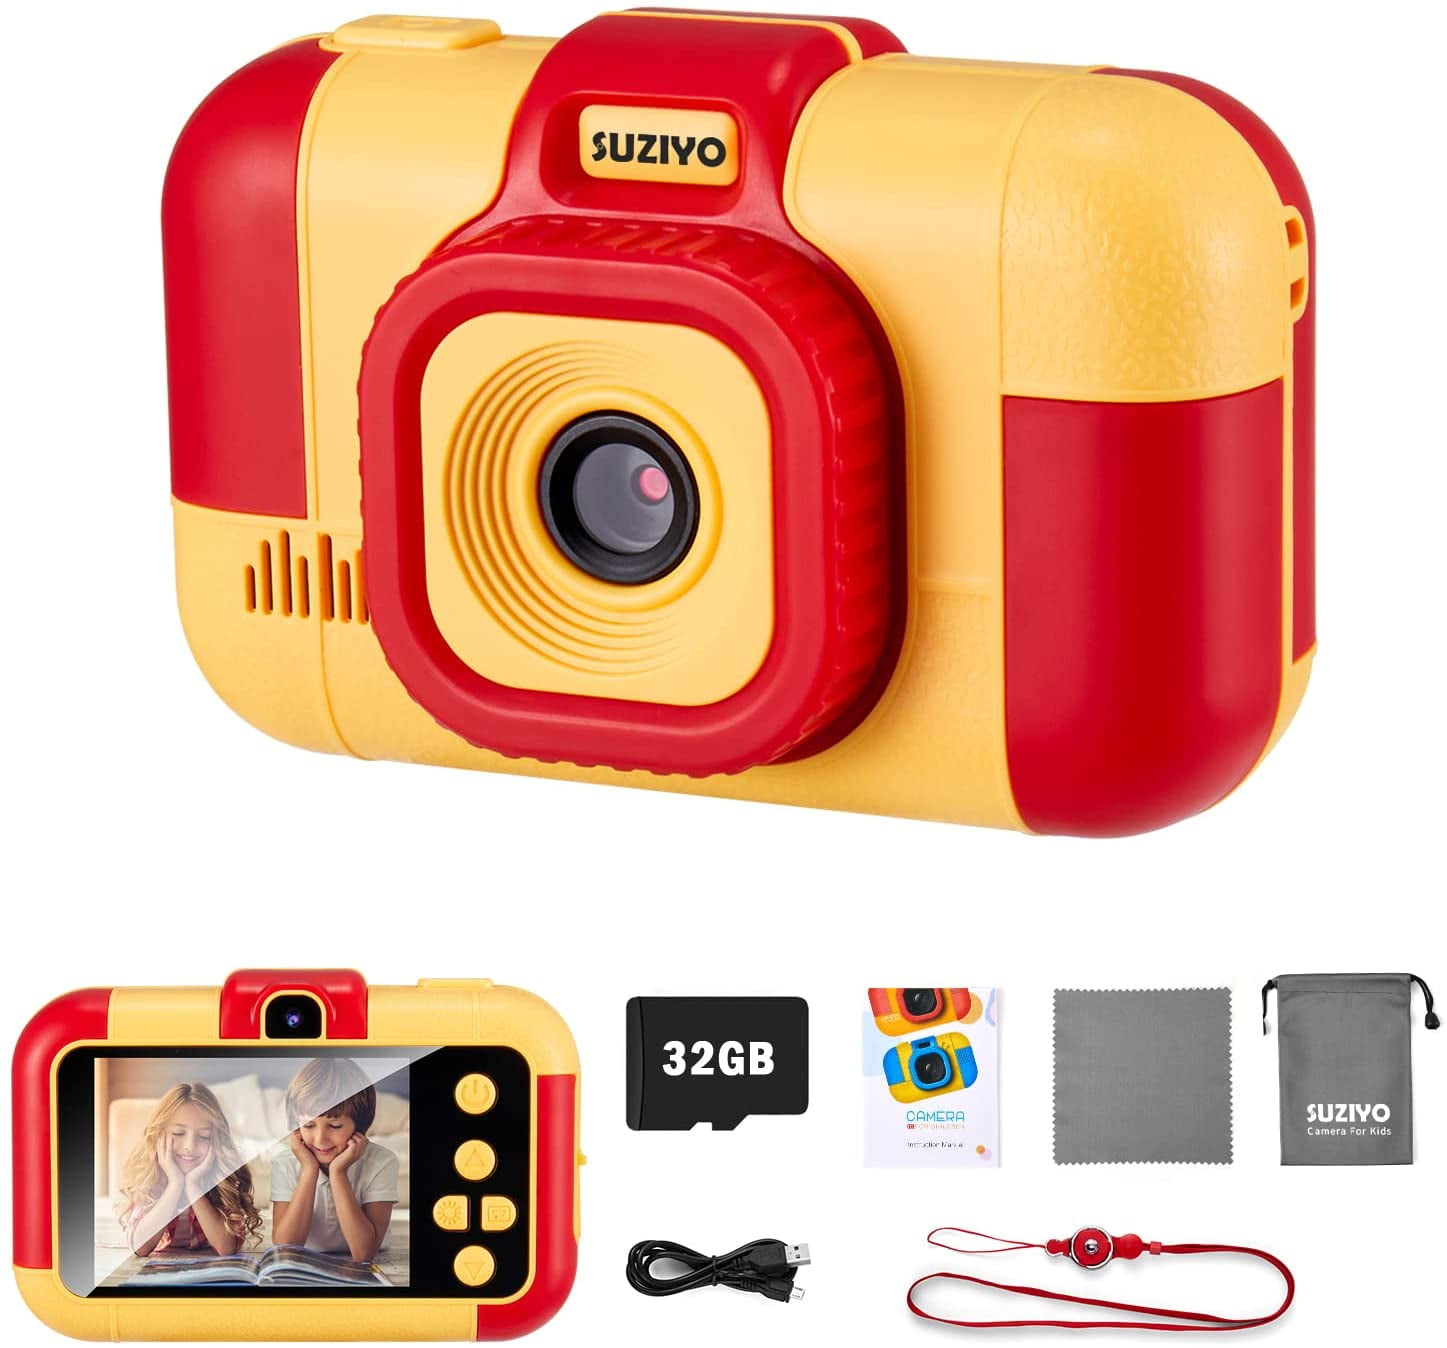 with 32G Micro SD Card, Red SUZIYO Kids Digital Camera Best Christmas Electronic Gifts Toys for Age 3-10 Years Old Boys & Girls Toddlers Children Selfie Video Camcorder 1080P Dual Lens 2.4 Inch HD 